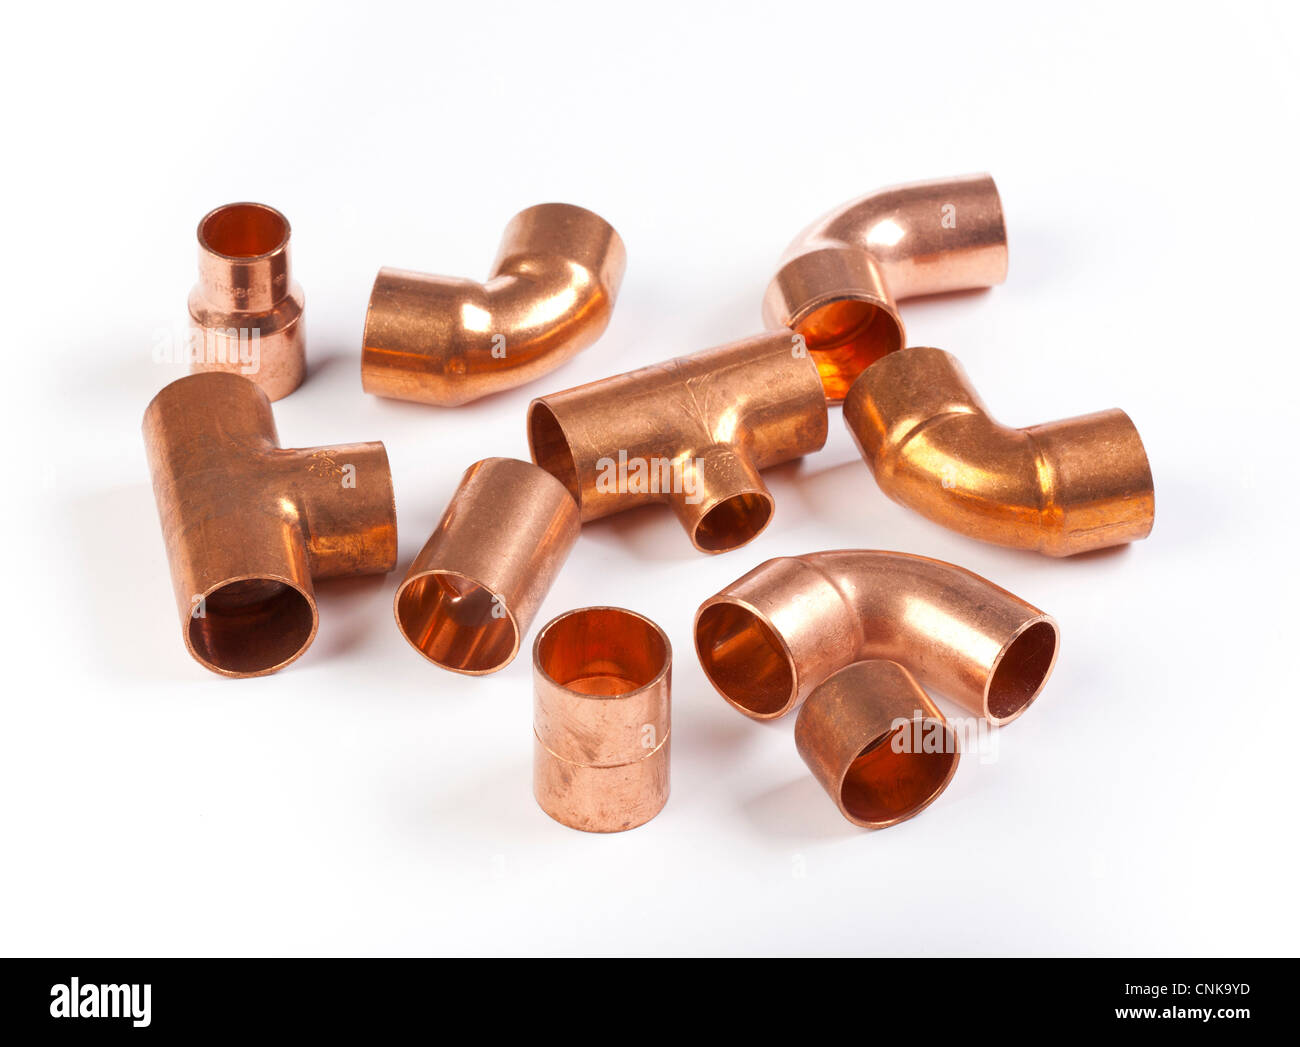 copper metal pipe connectors / fittings Stock Photo